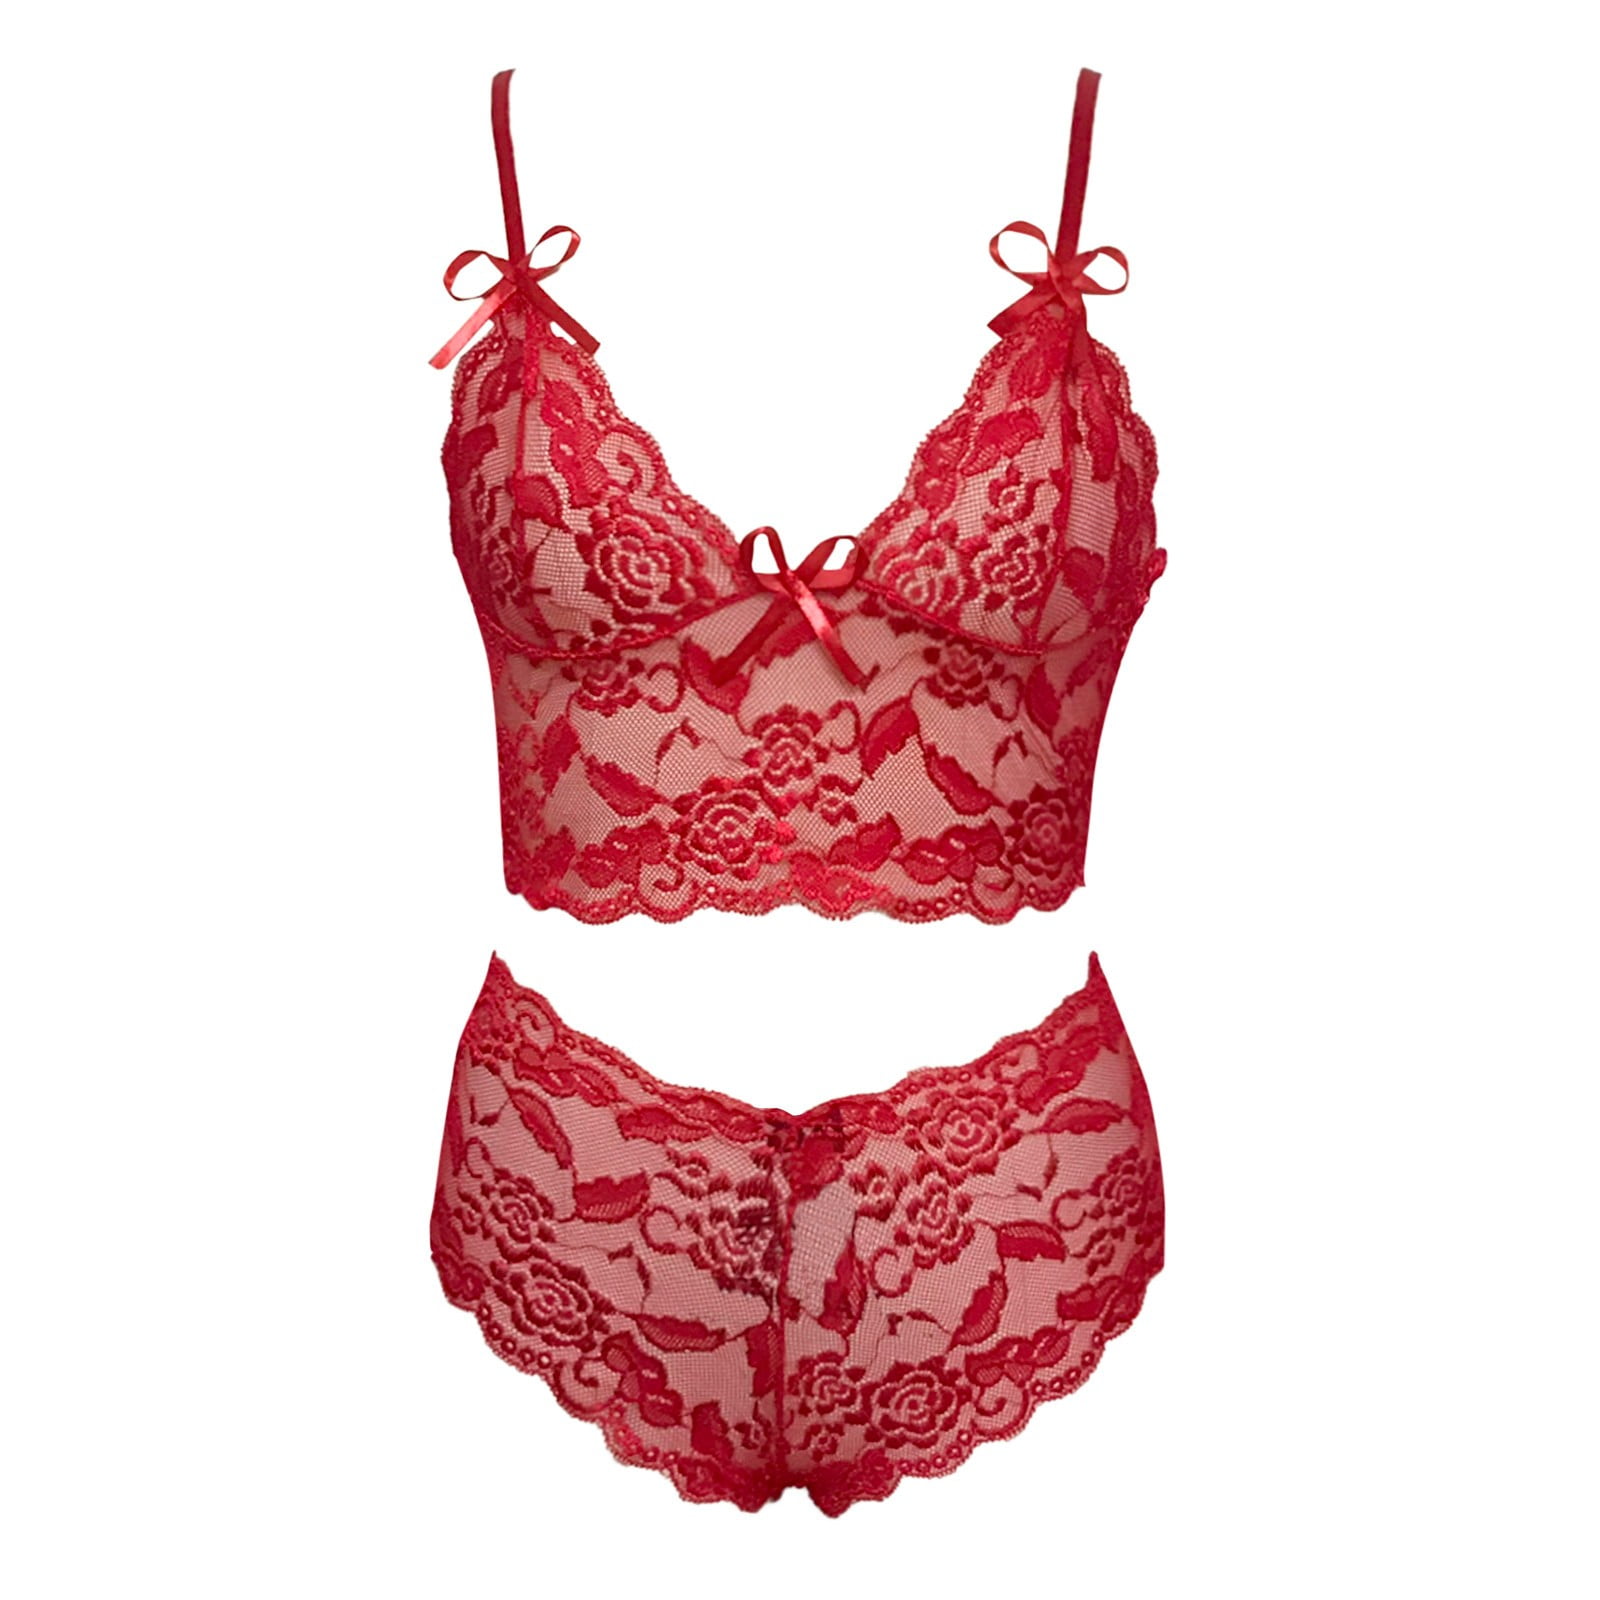 Womens Clothing Lingerie Lingerie and panty sets Briar Thorn Printed Lace Camisole And Shorts Lingerie Set in Red 